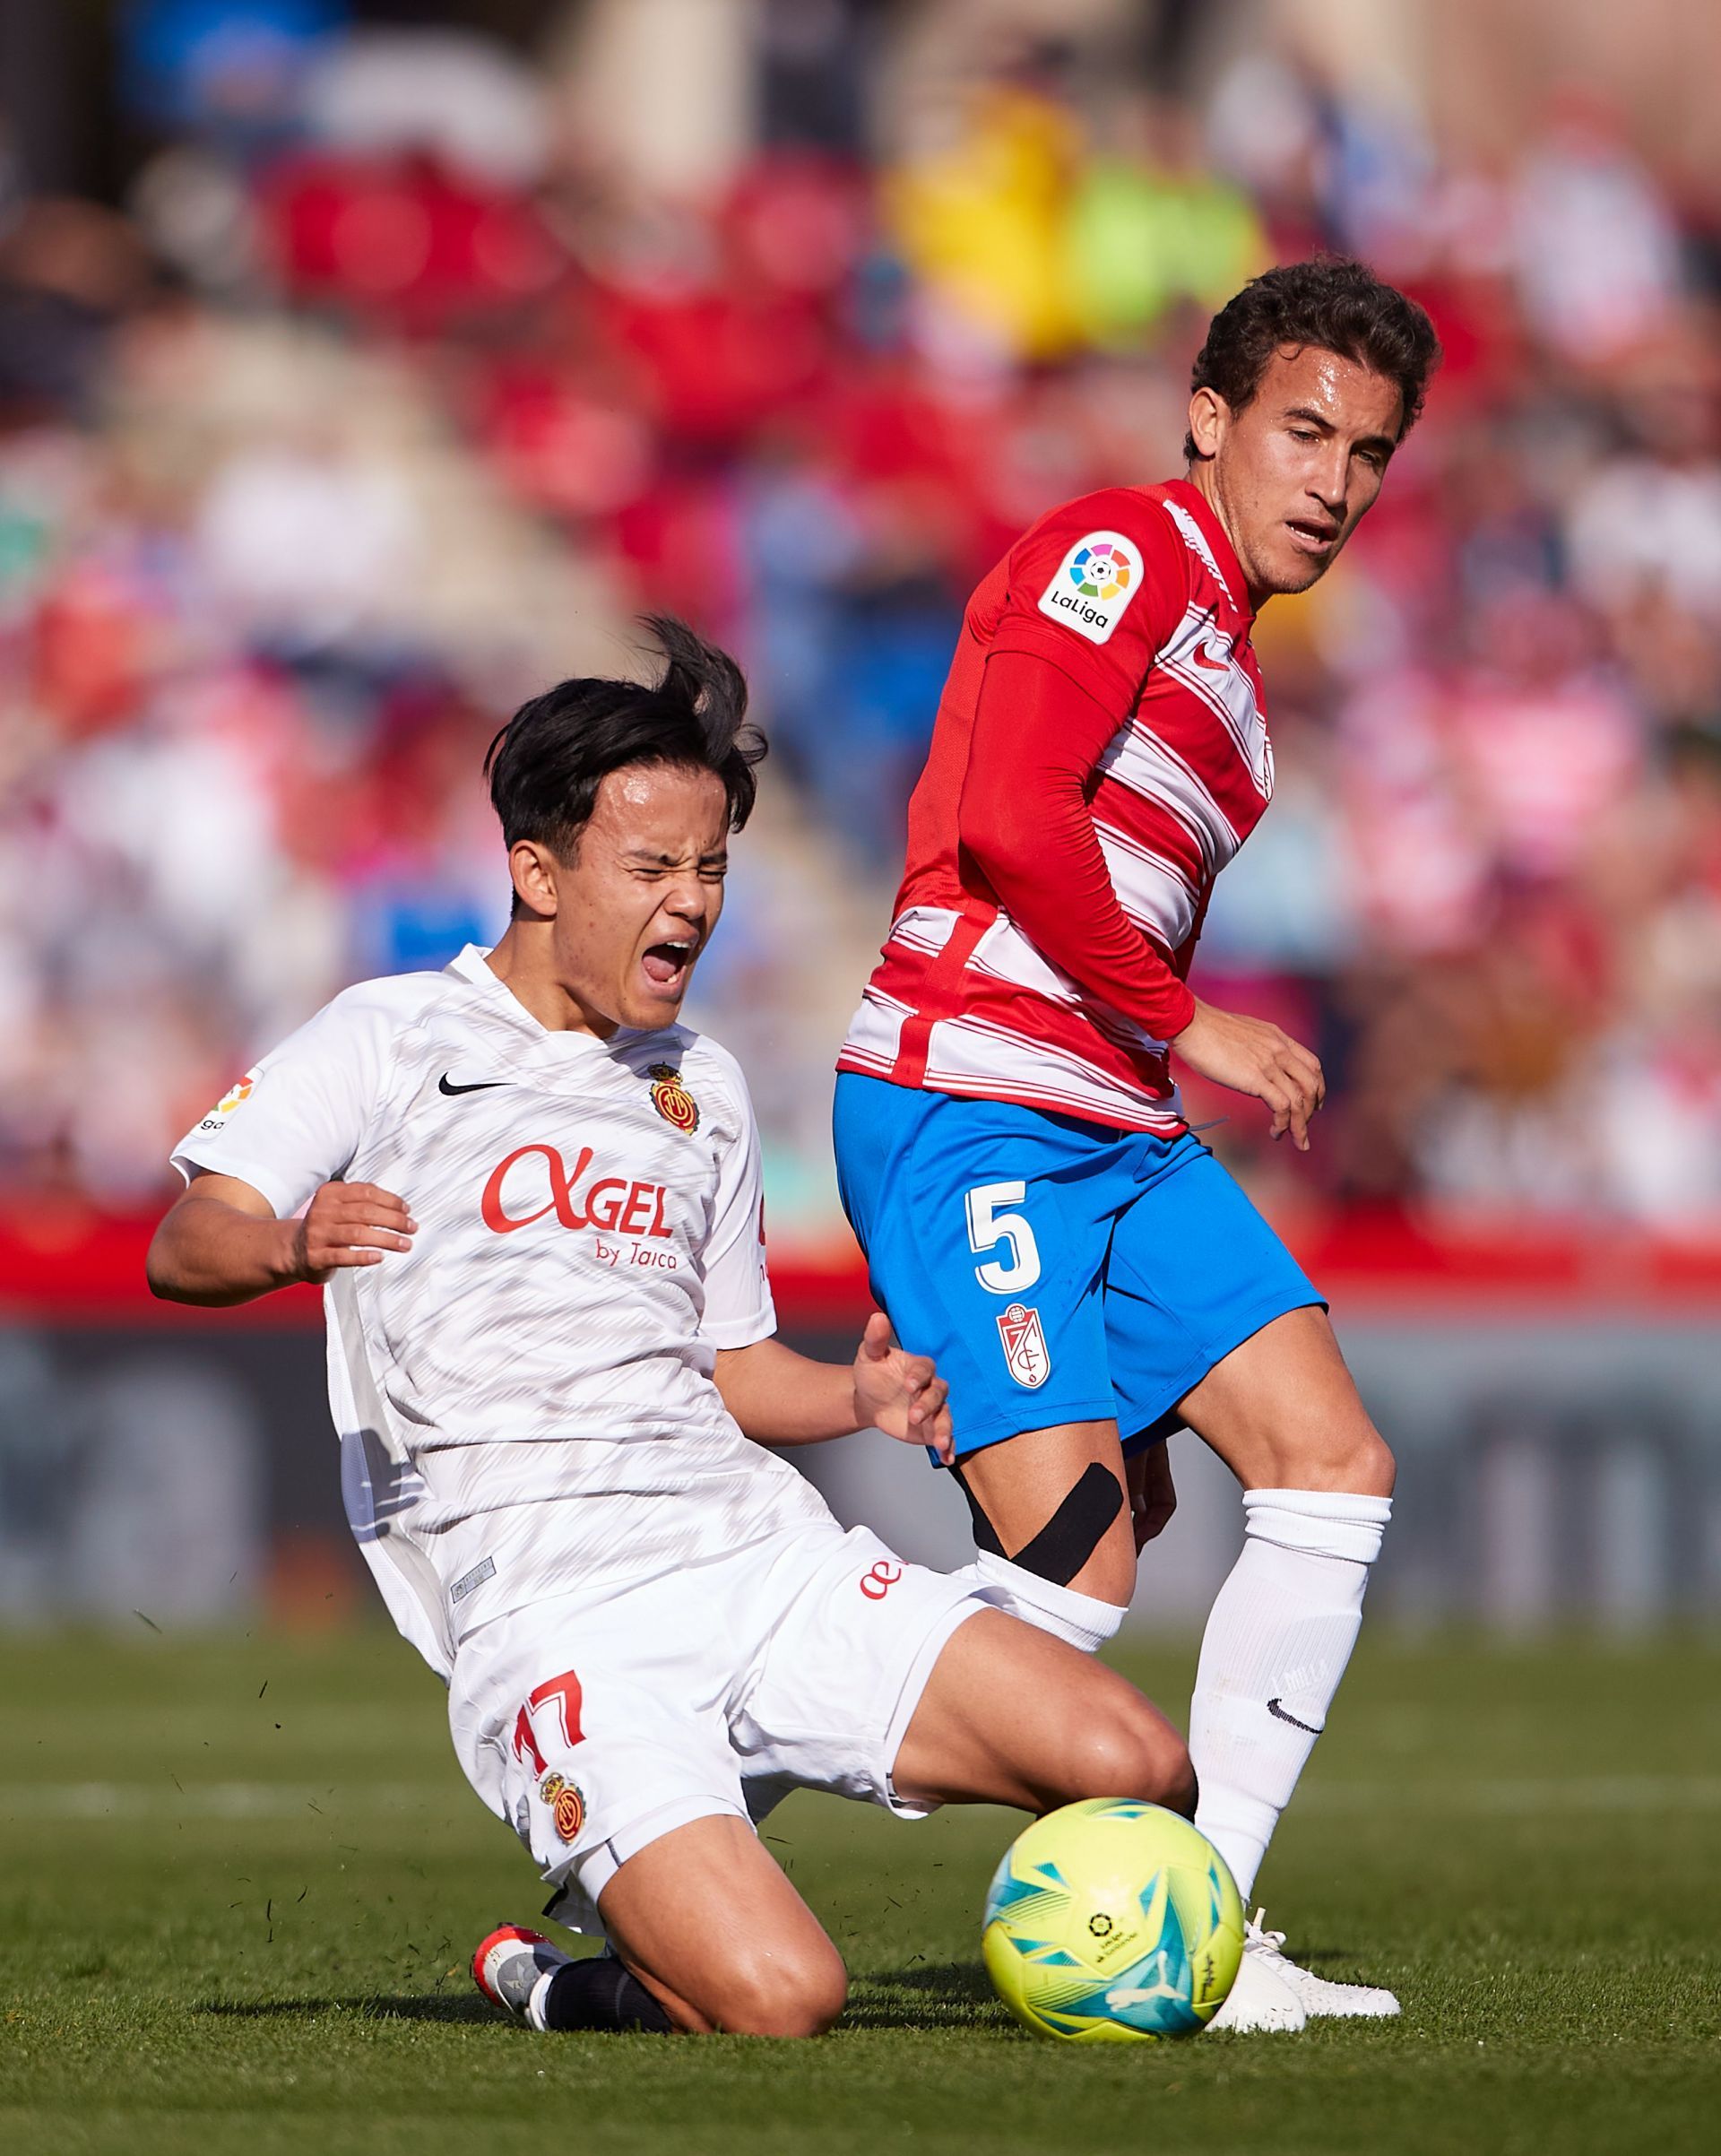 Granada are looking to make it four wins in a row against Mallorca.